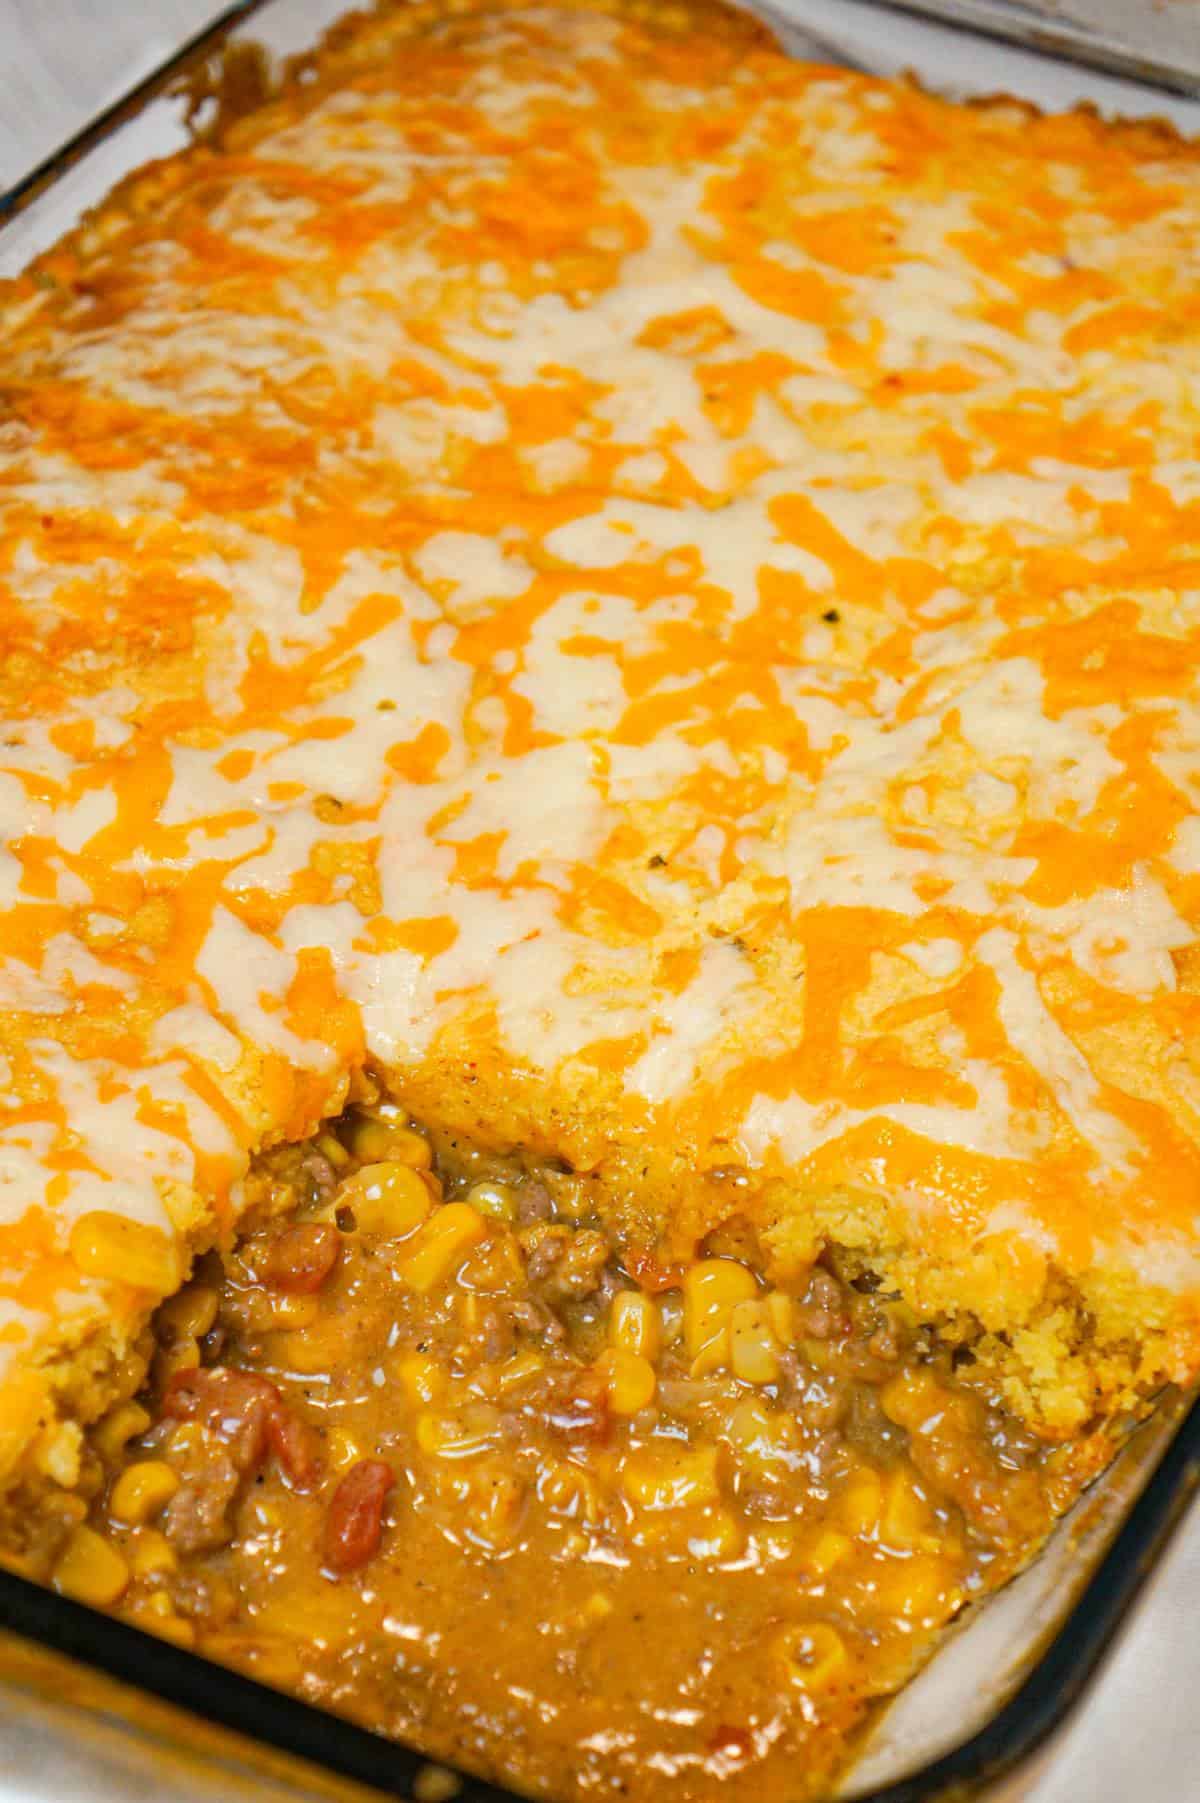 Mexican Cornbread Casserole is an easy ground beef dinner recipe loaded with corn, Rotel diced tomatoes and green chilies, taco seasoning and shredded cheese all topped with Jiffy cornbread.